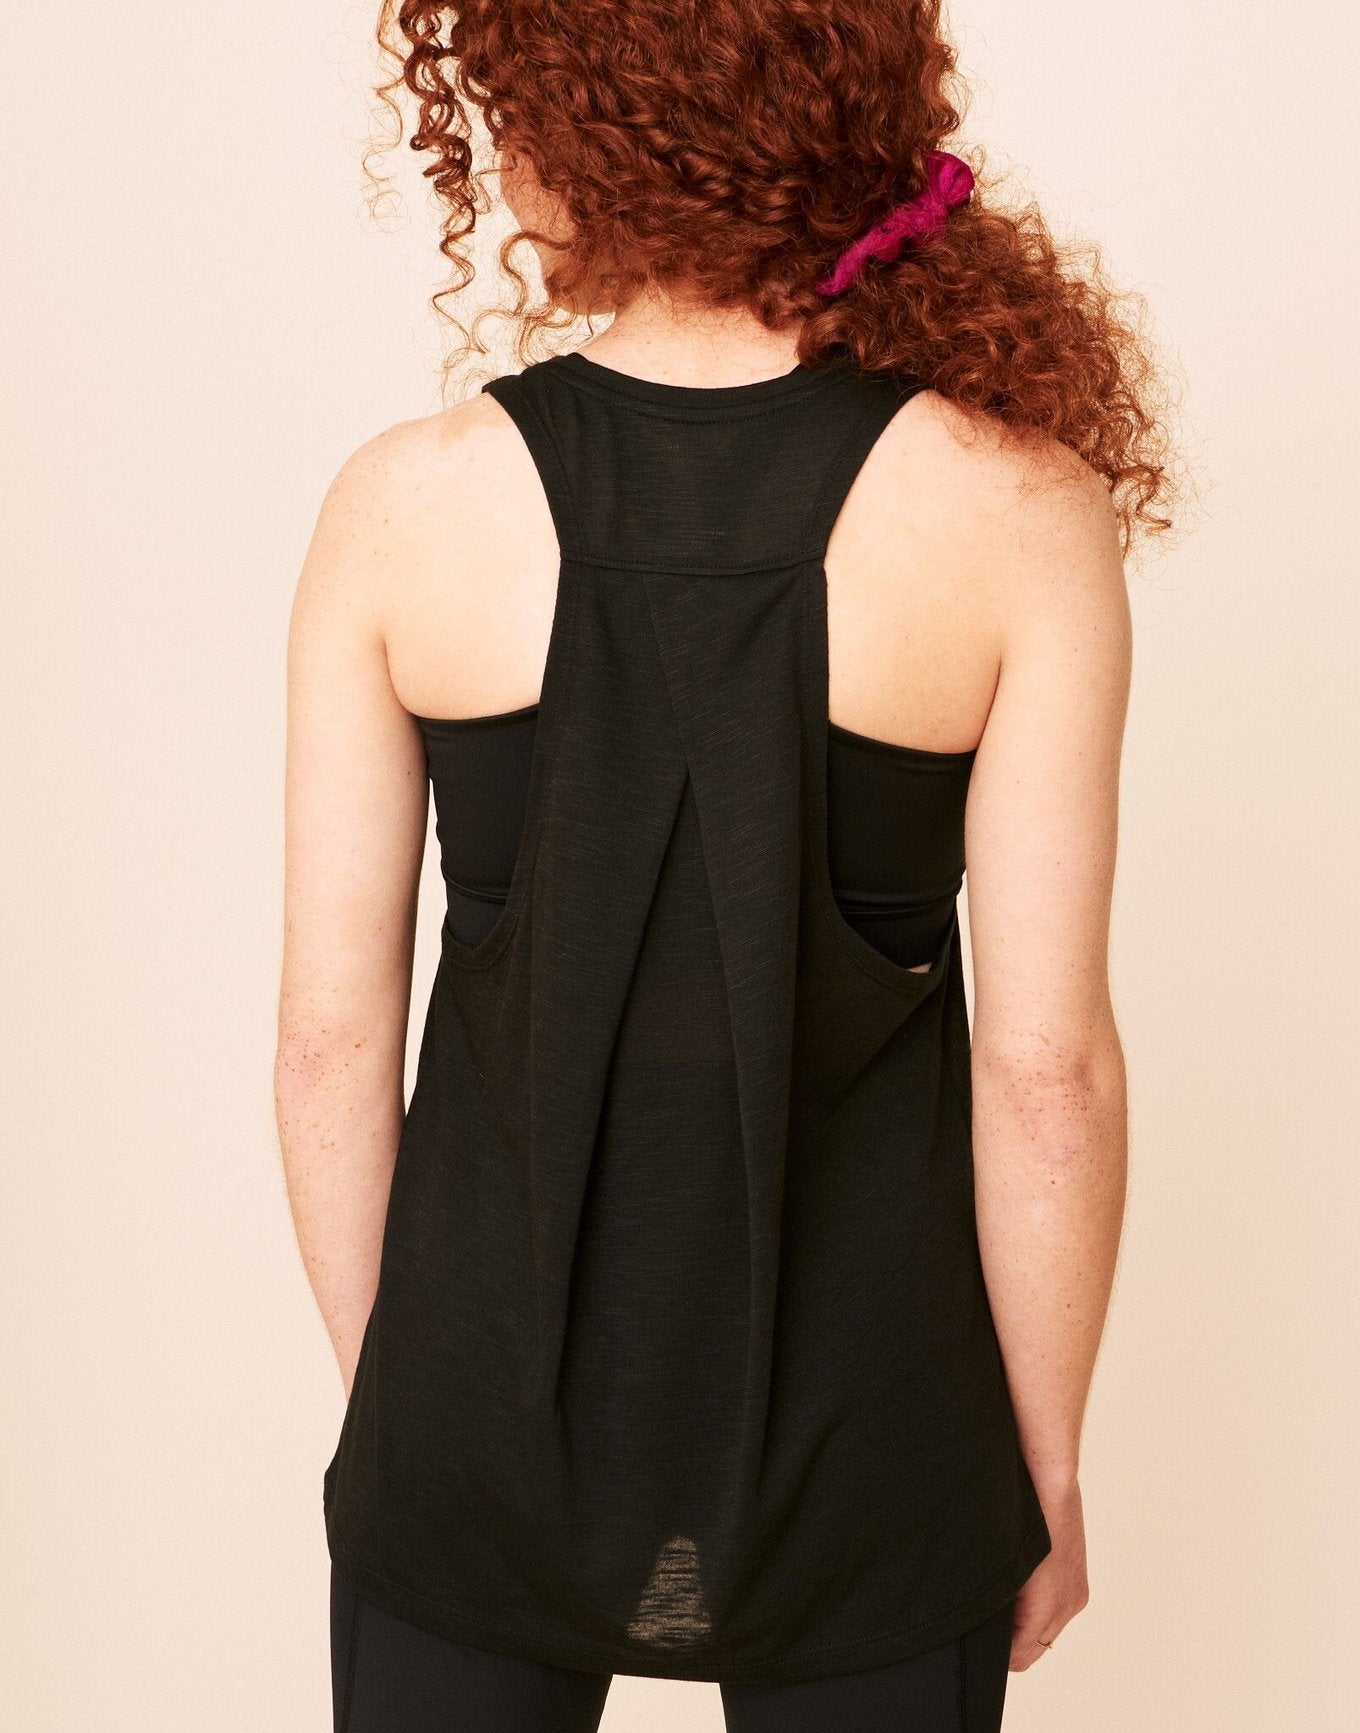 Earth Republic Emmaline Dropped Armhole Tank Workout Tank in color Jet Black and shape tank